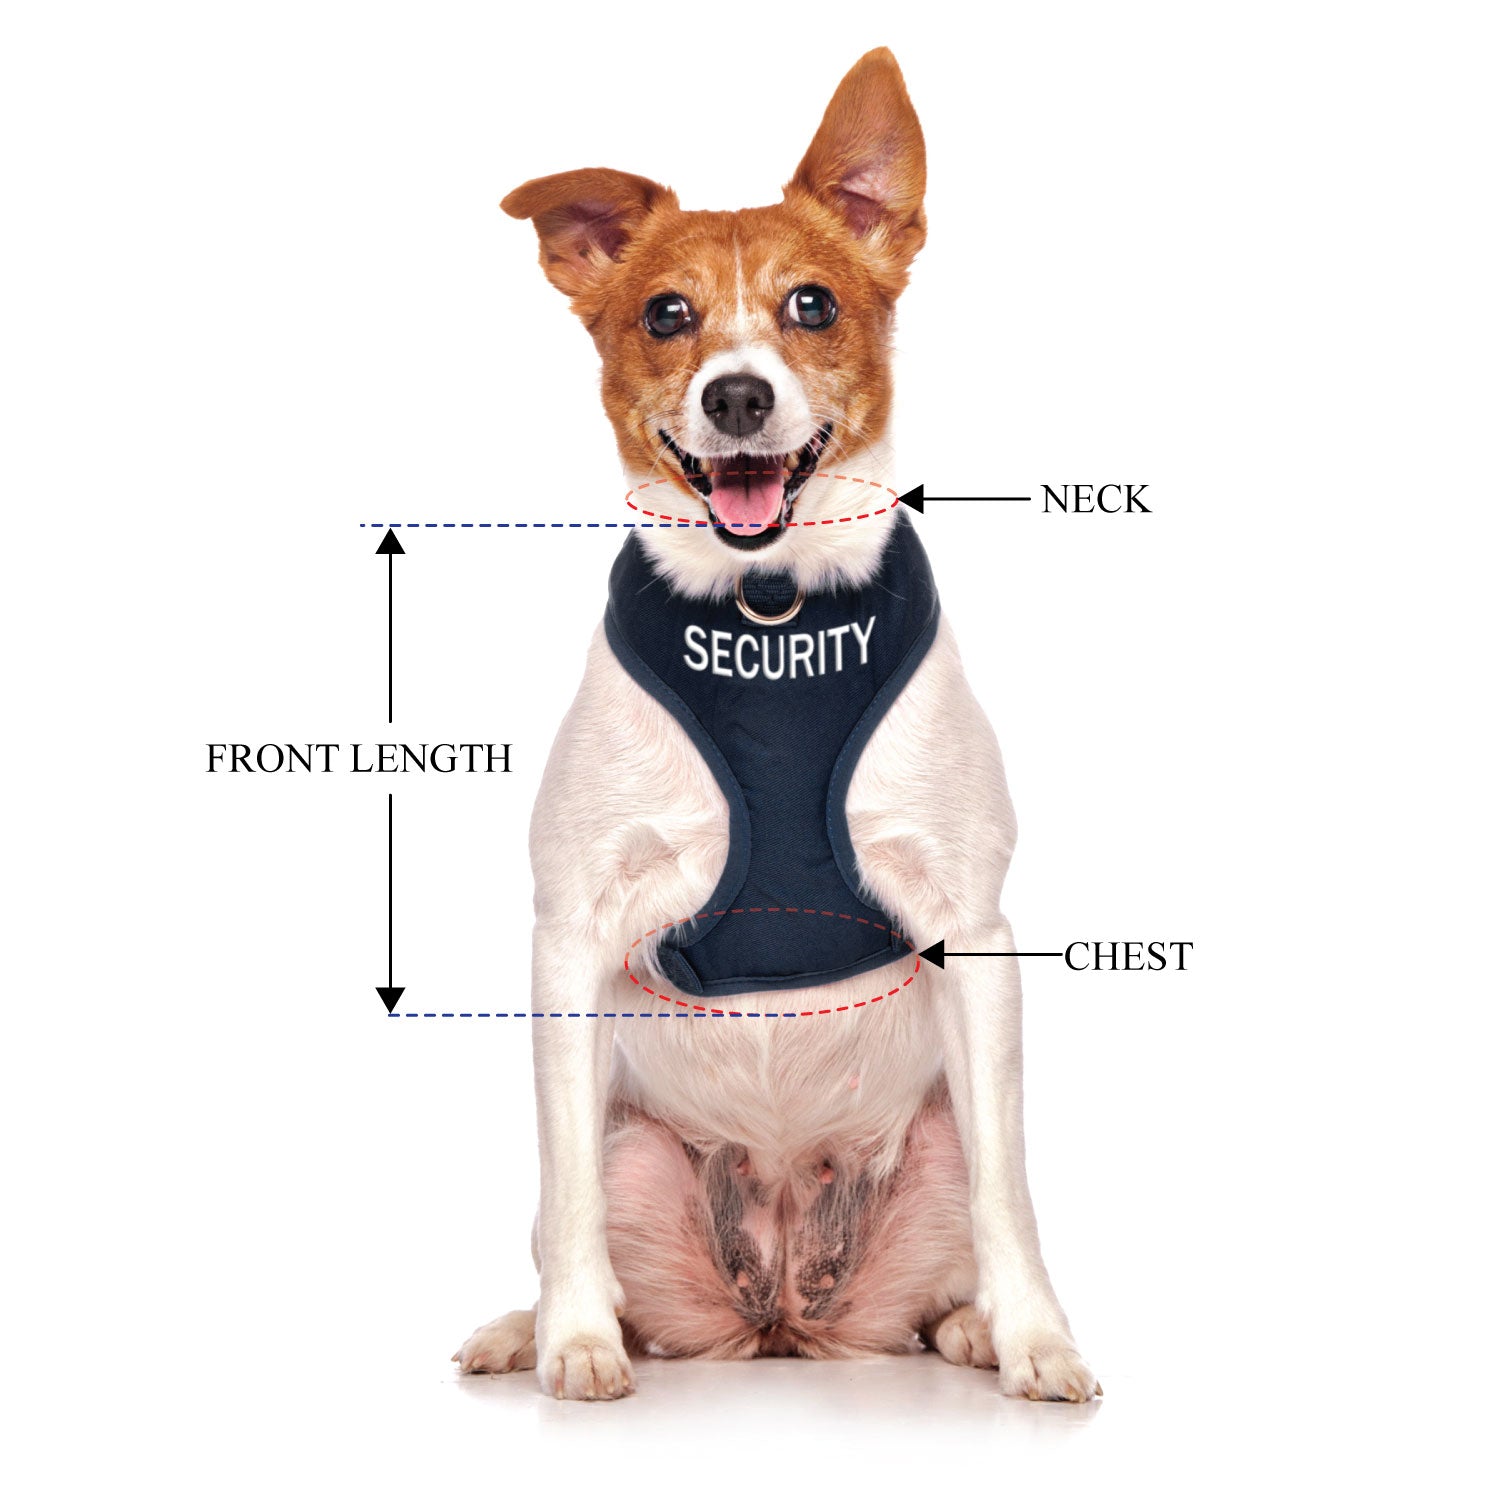 SECURITY - Small adjustable Vest Harness